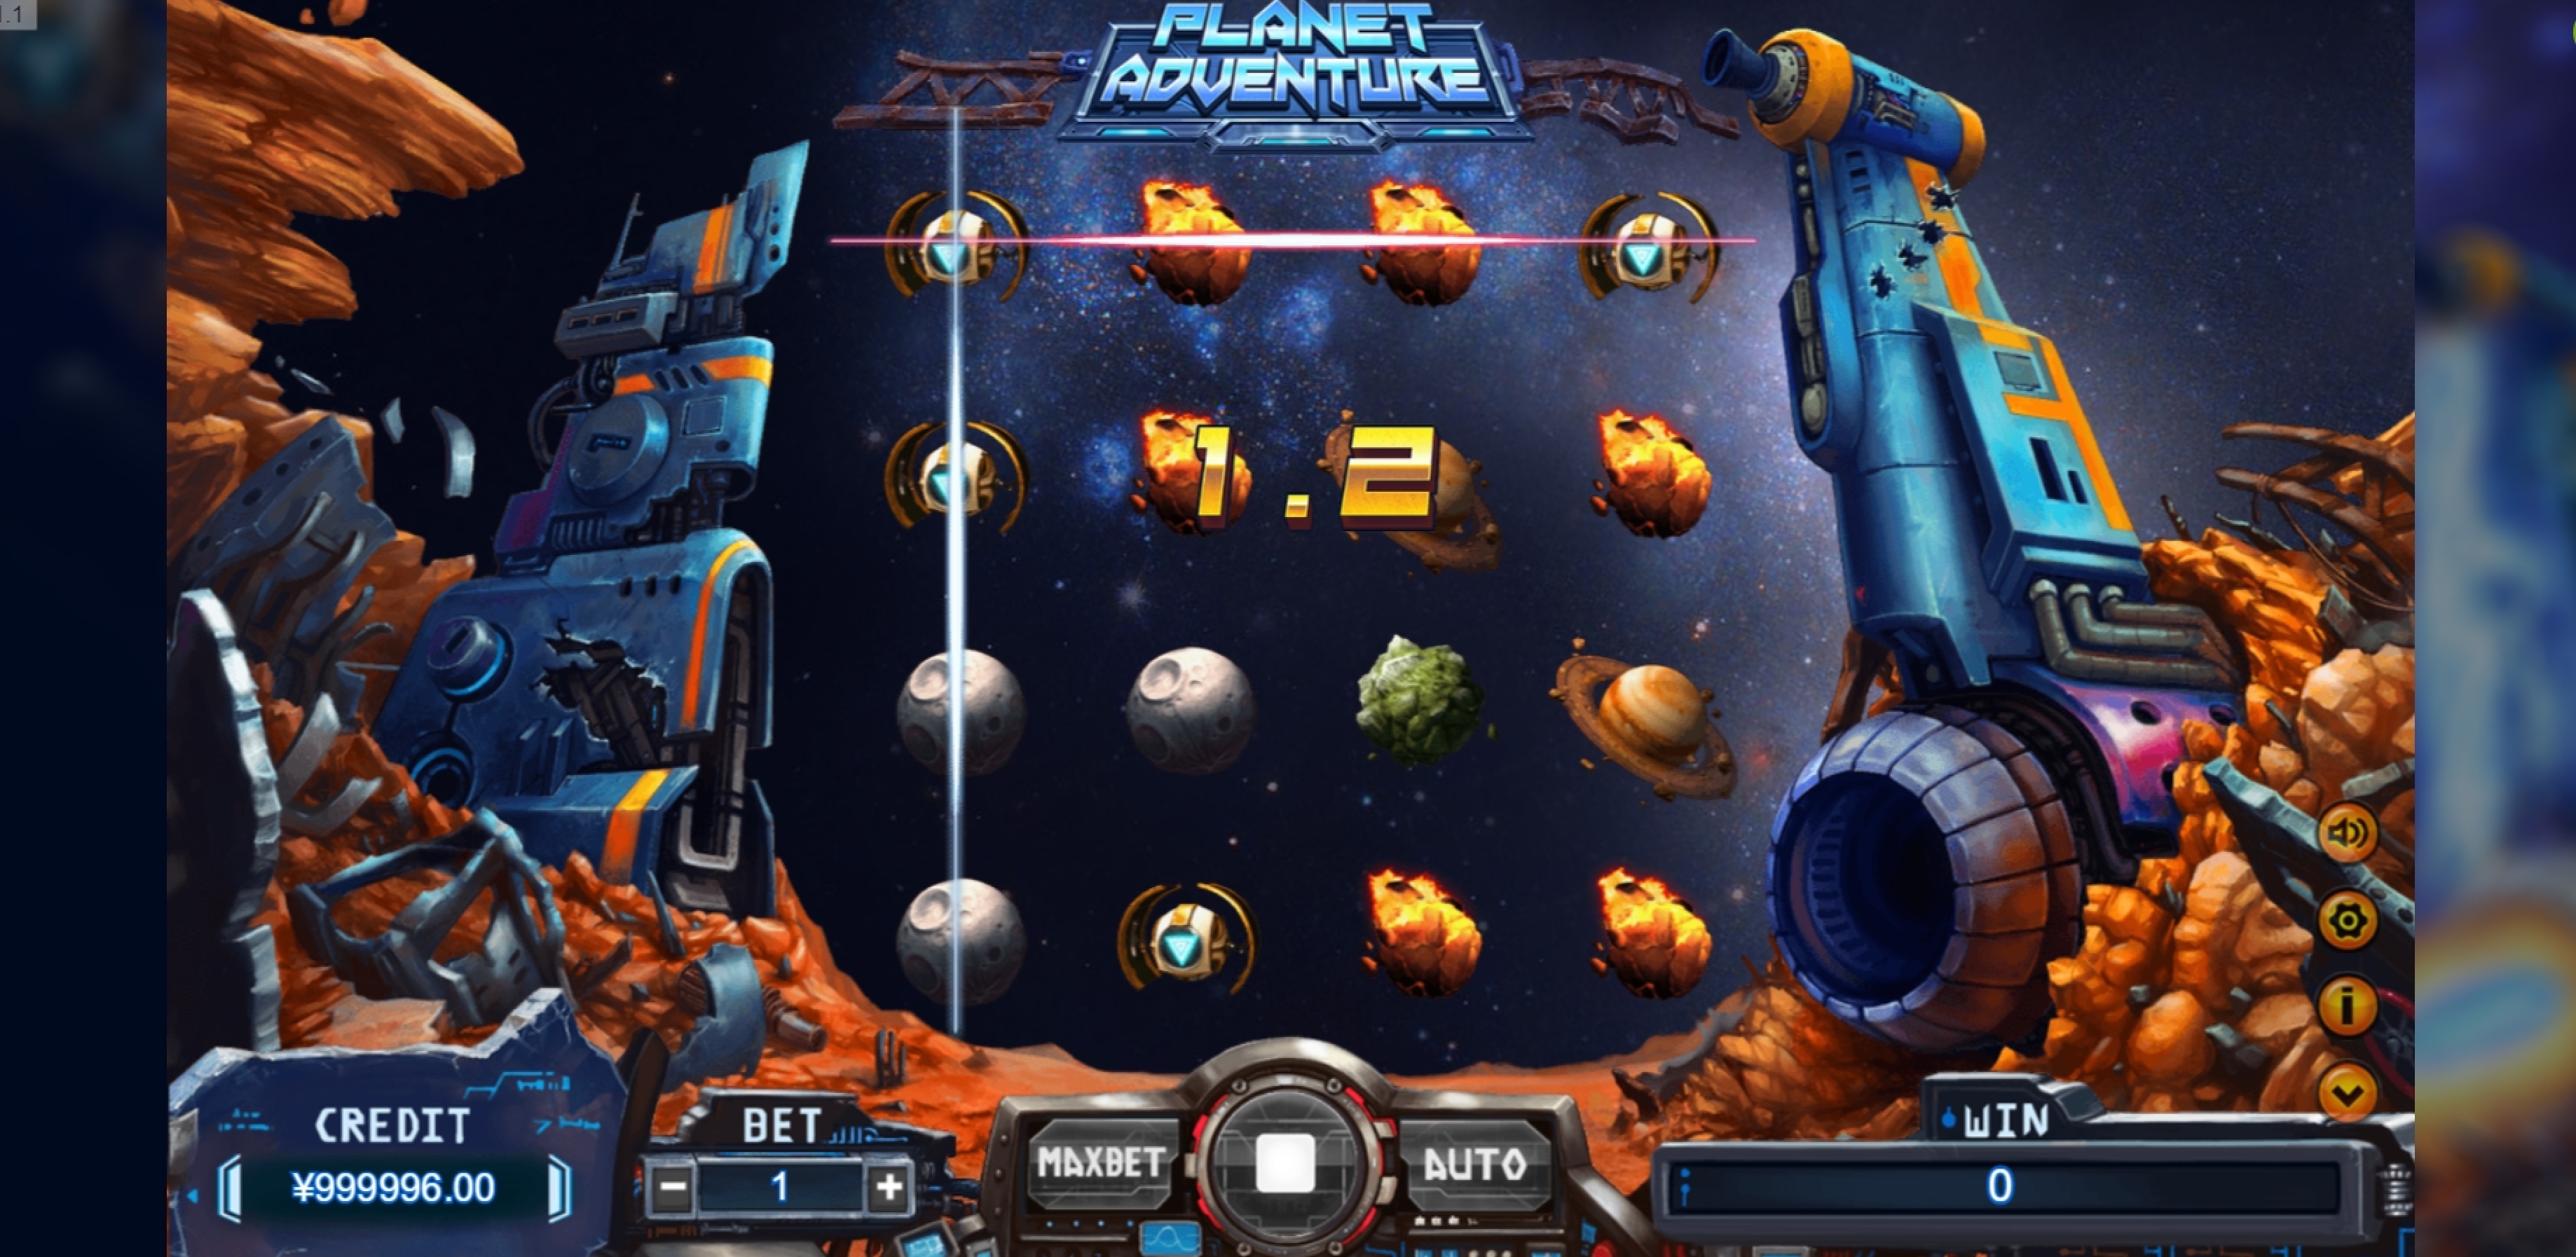 Win Money in Planet Adventure Free Slot Game by TIDY